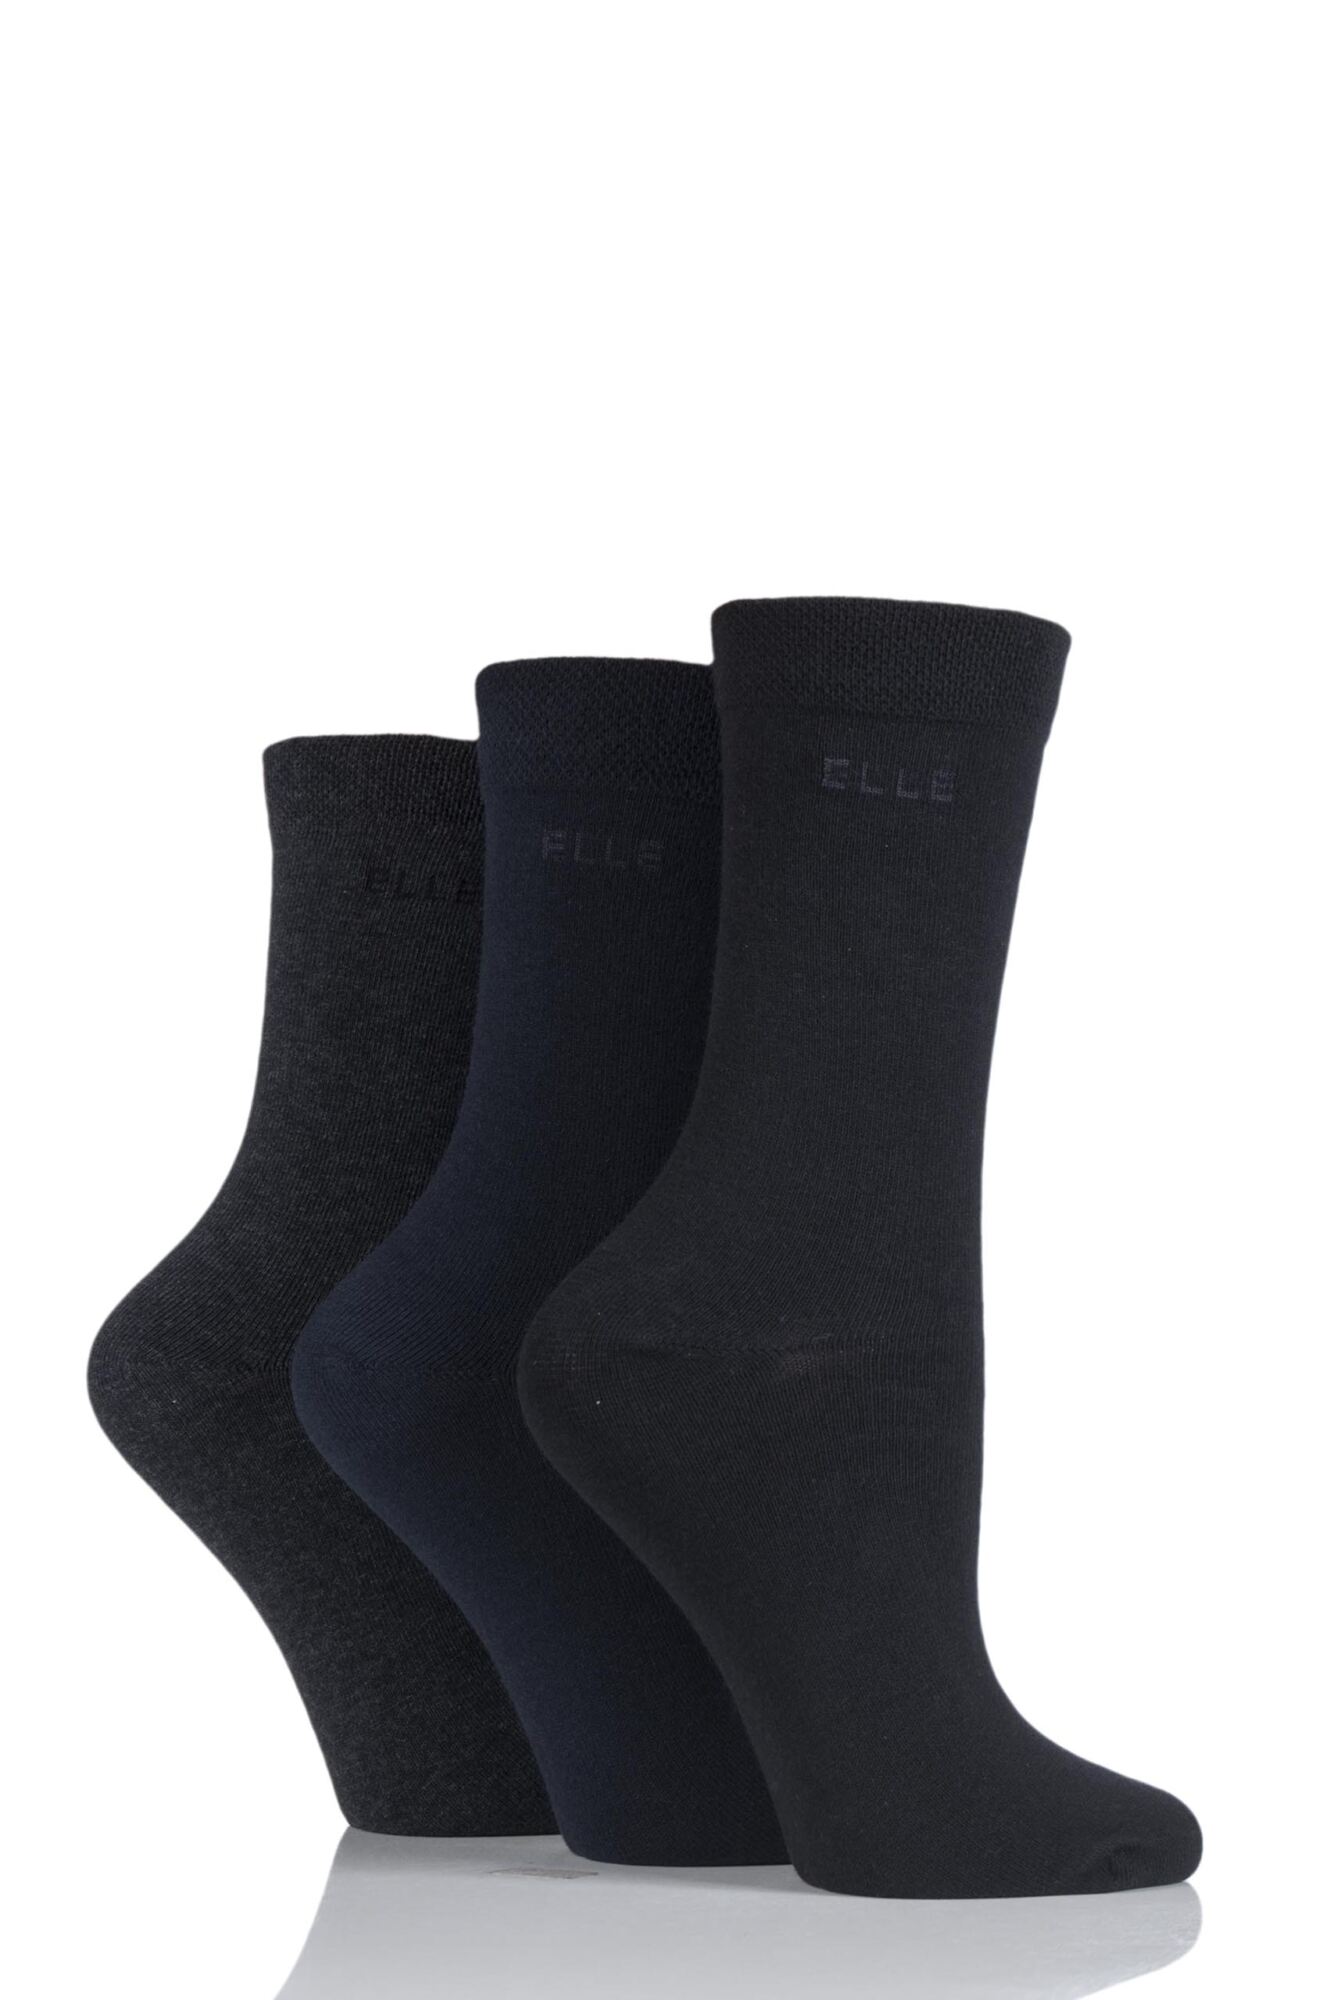 Ladies 3 Pair Elle Plain, Striped and Patterned Cotton Socks with Hand ...